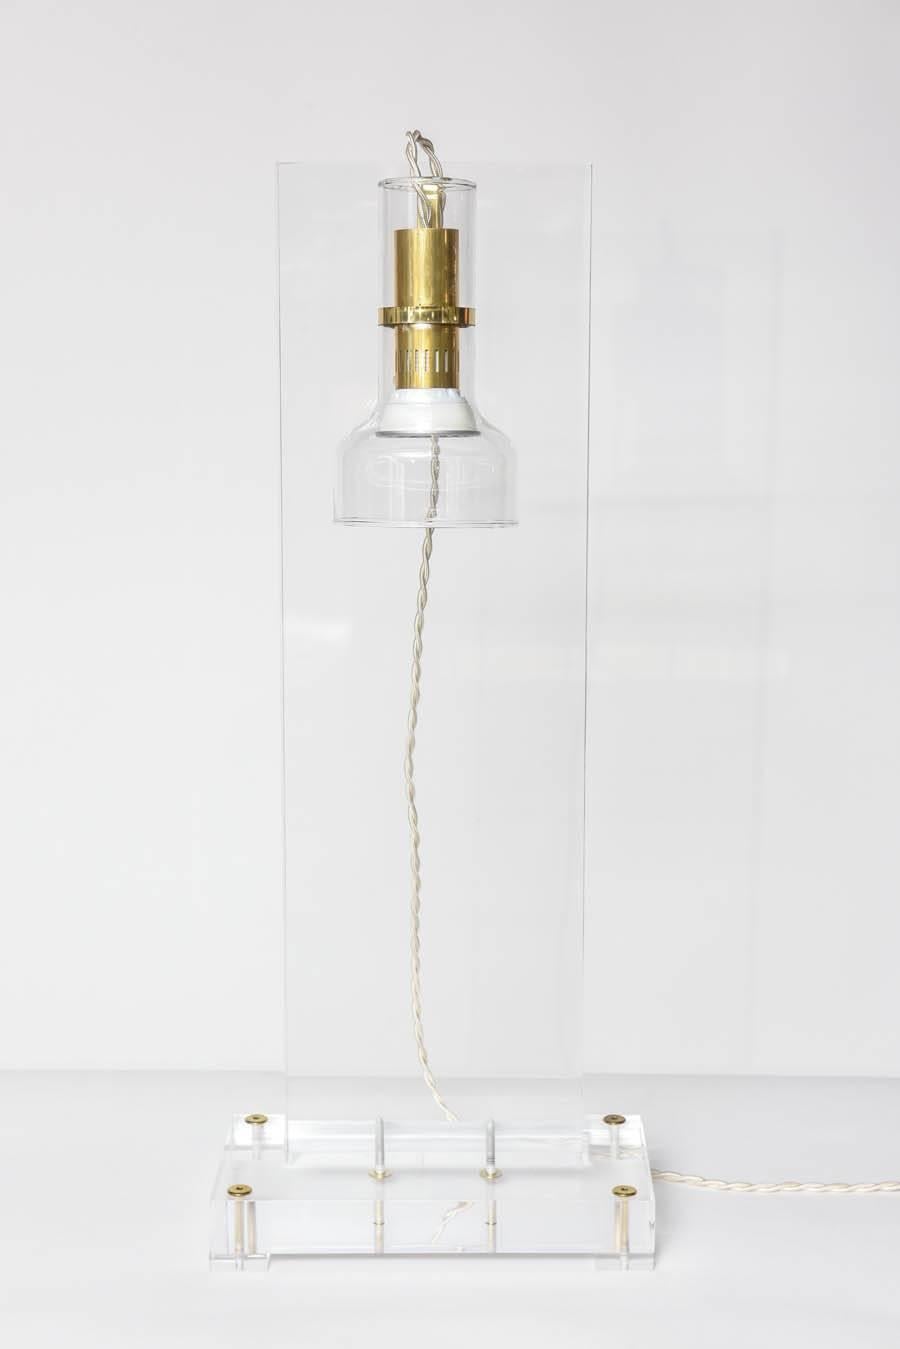 Tall and architectural, this acrylic and glass wonderful lamp was designed for an installation during Basel Miami.